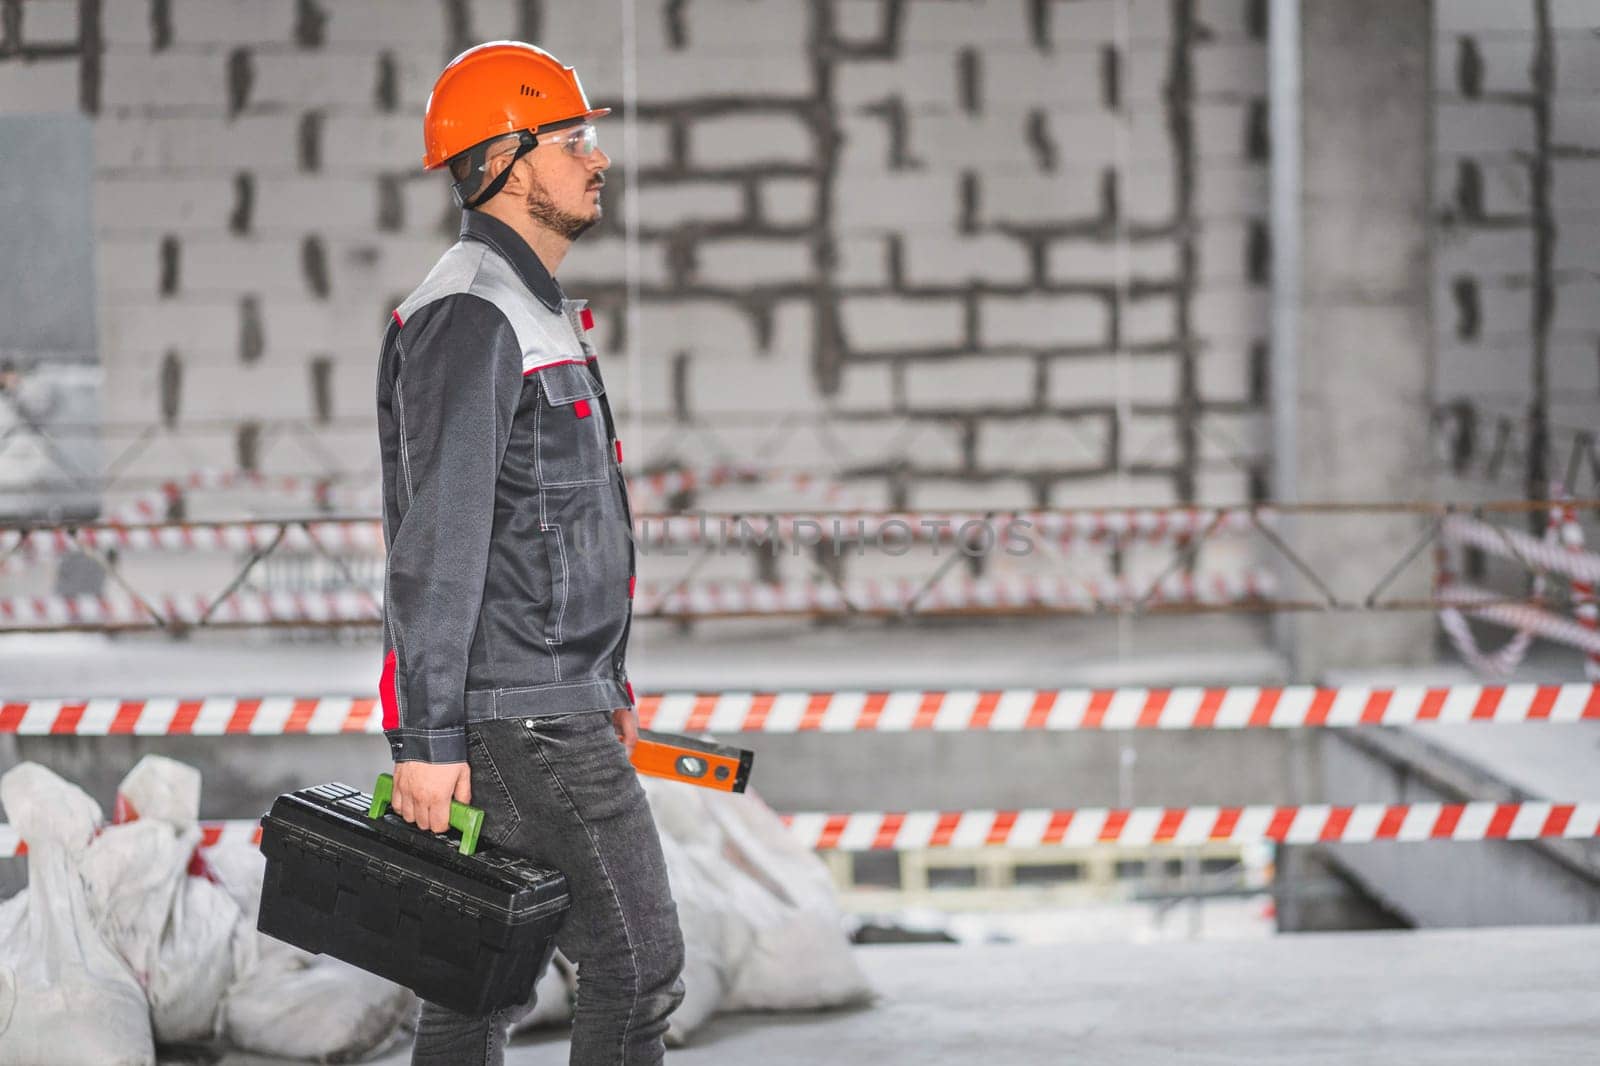 A worker in overalls and a helmet came to a new work site. Builder in uniform carrying toolbox at construction site, copy space by Rom4ek